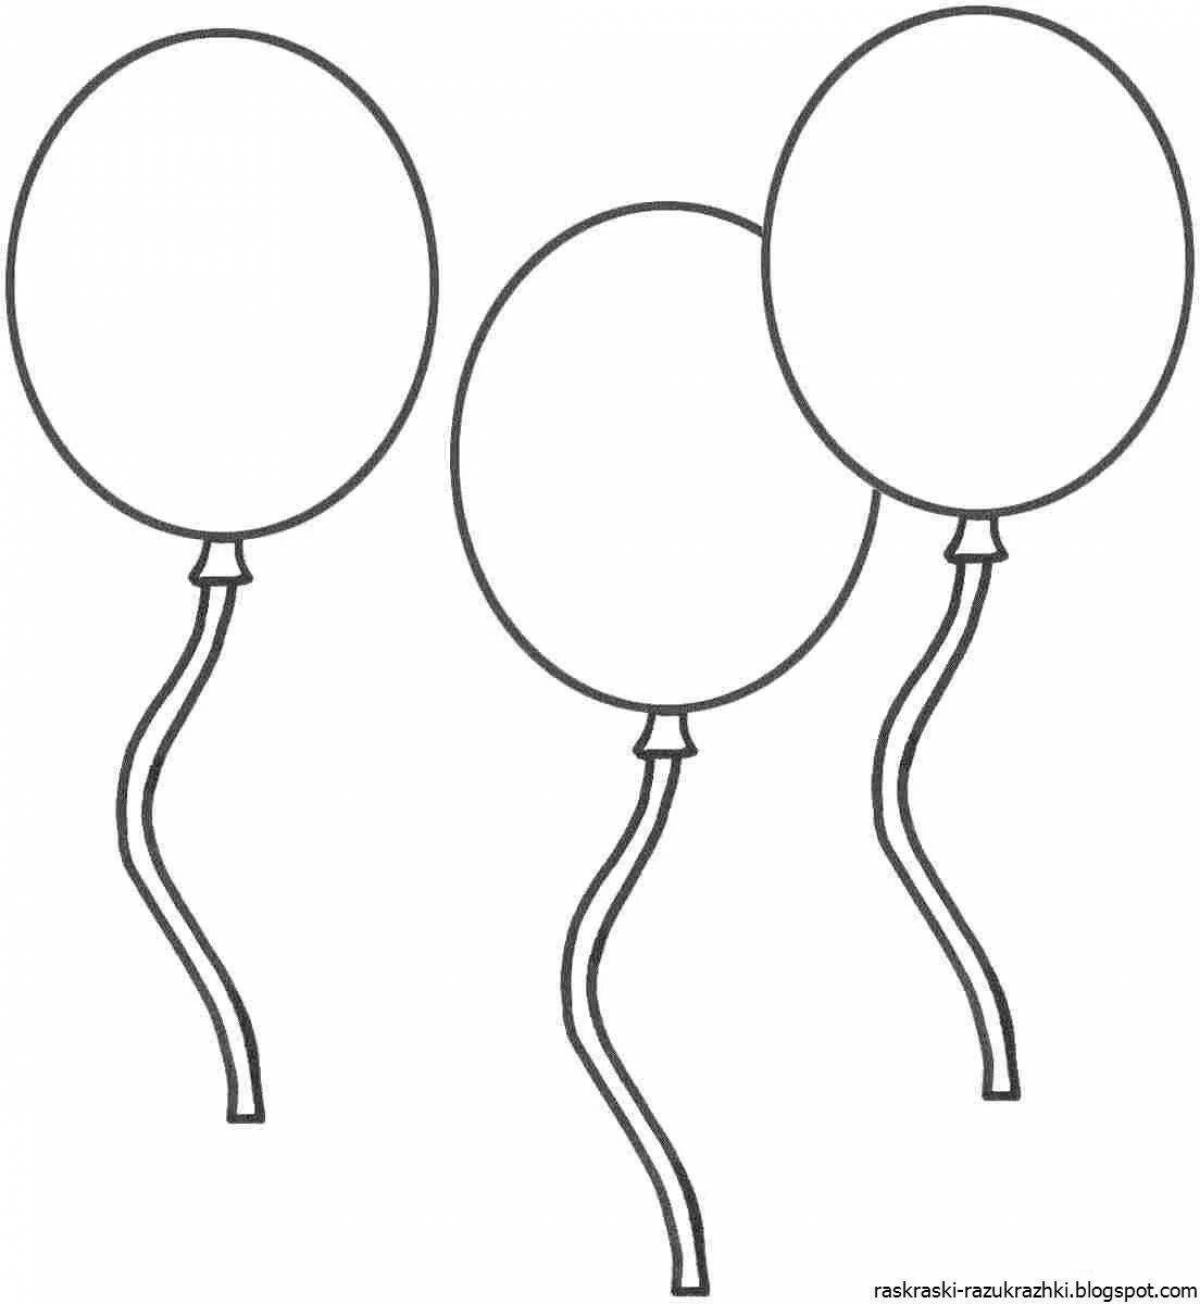 Outstanding coloring page with balloons for kids